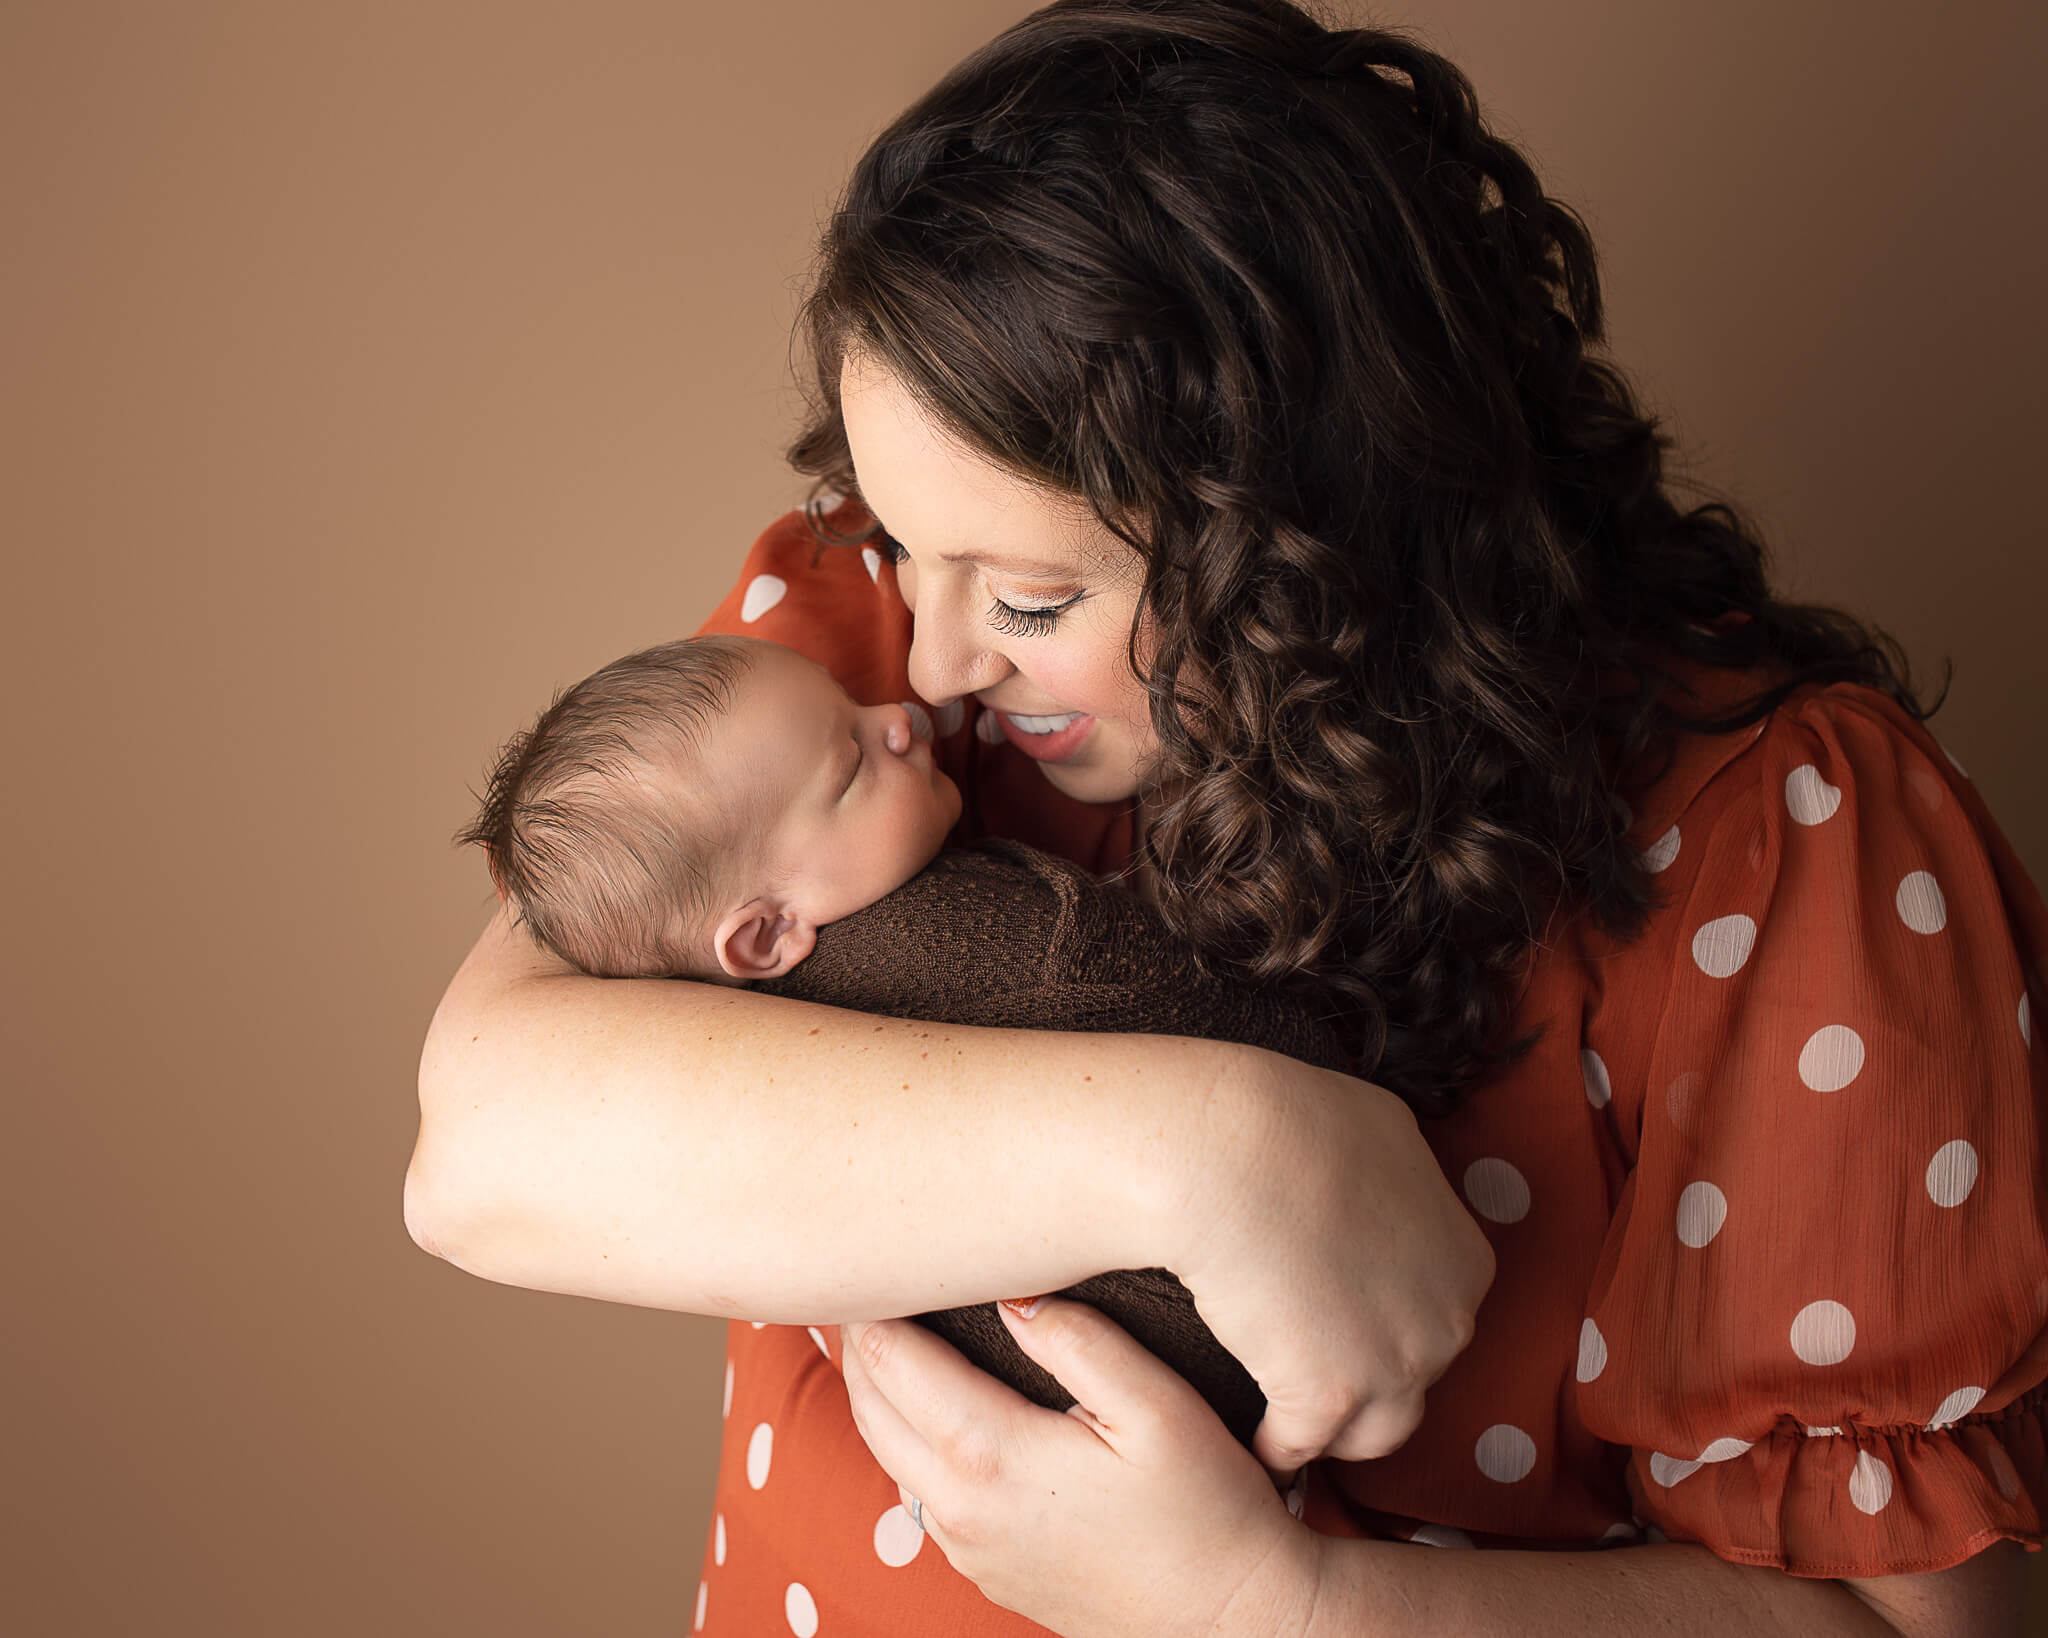 signs of post partum depression in blog photo of mom holding newborn